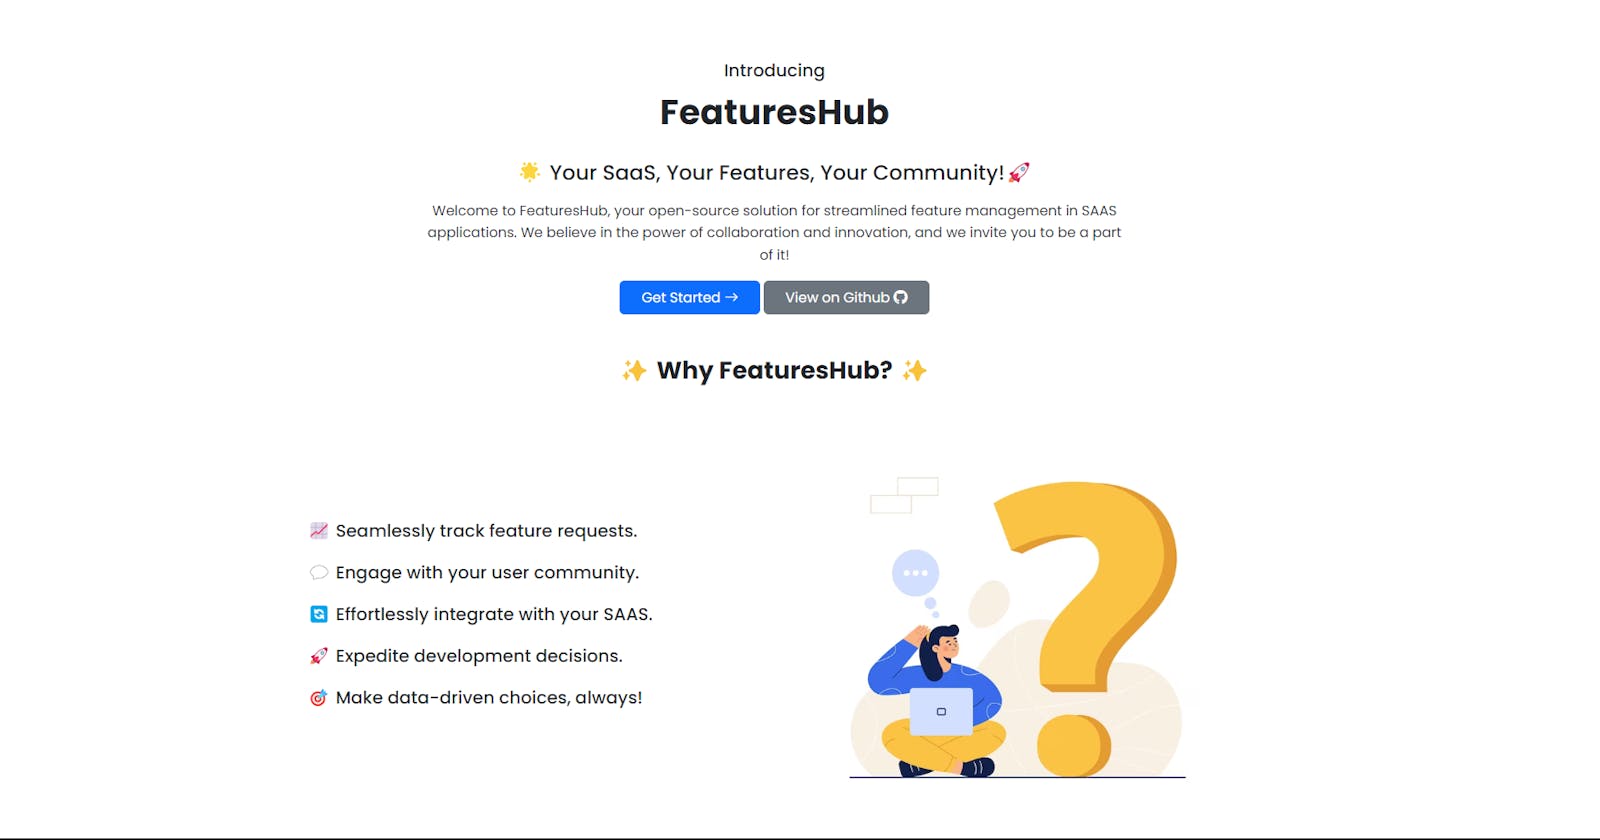 Introducing FeaturesHub: An Open-Source Application for Managing Feature Requests for SAAS